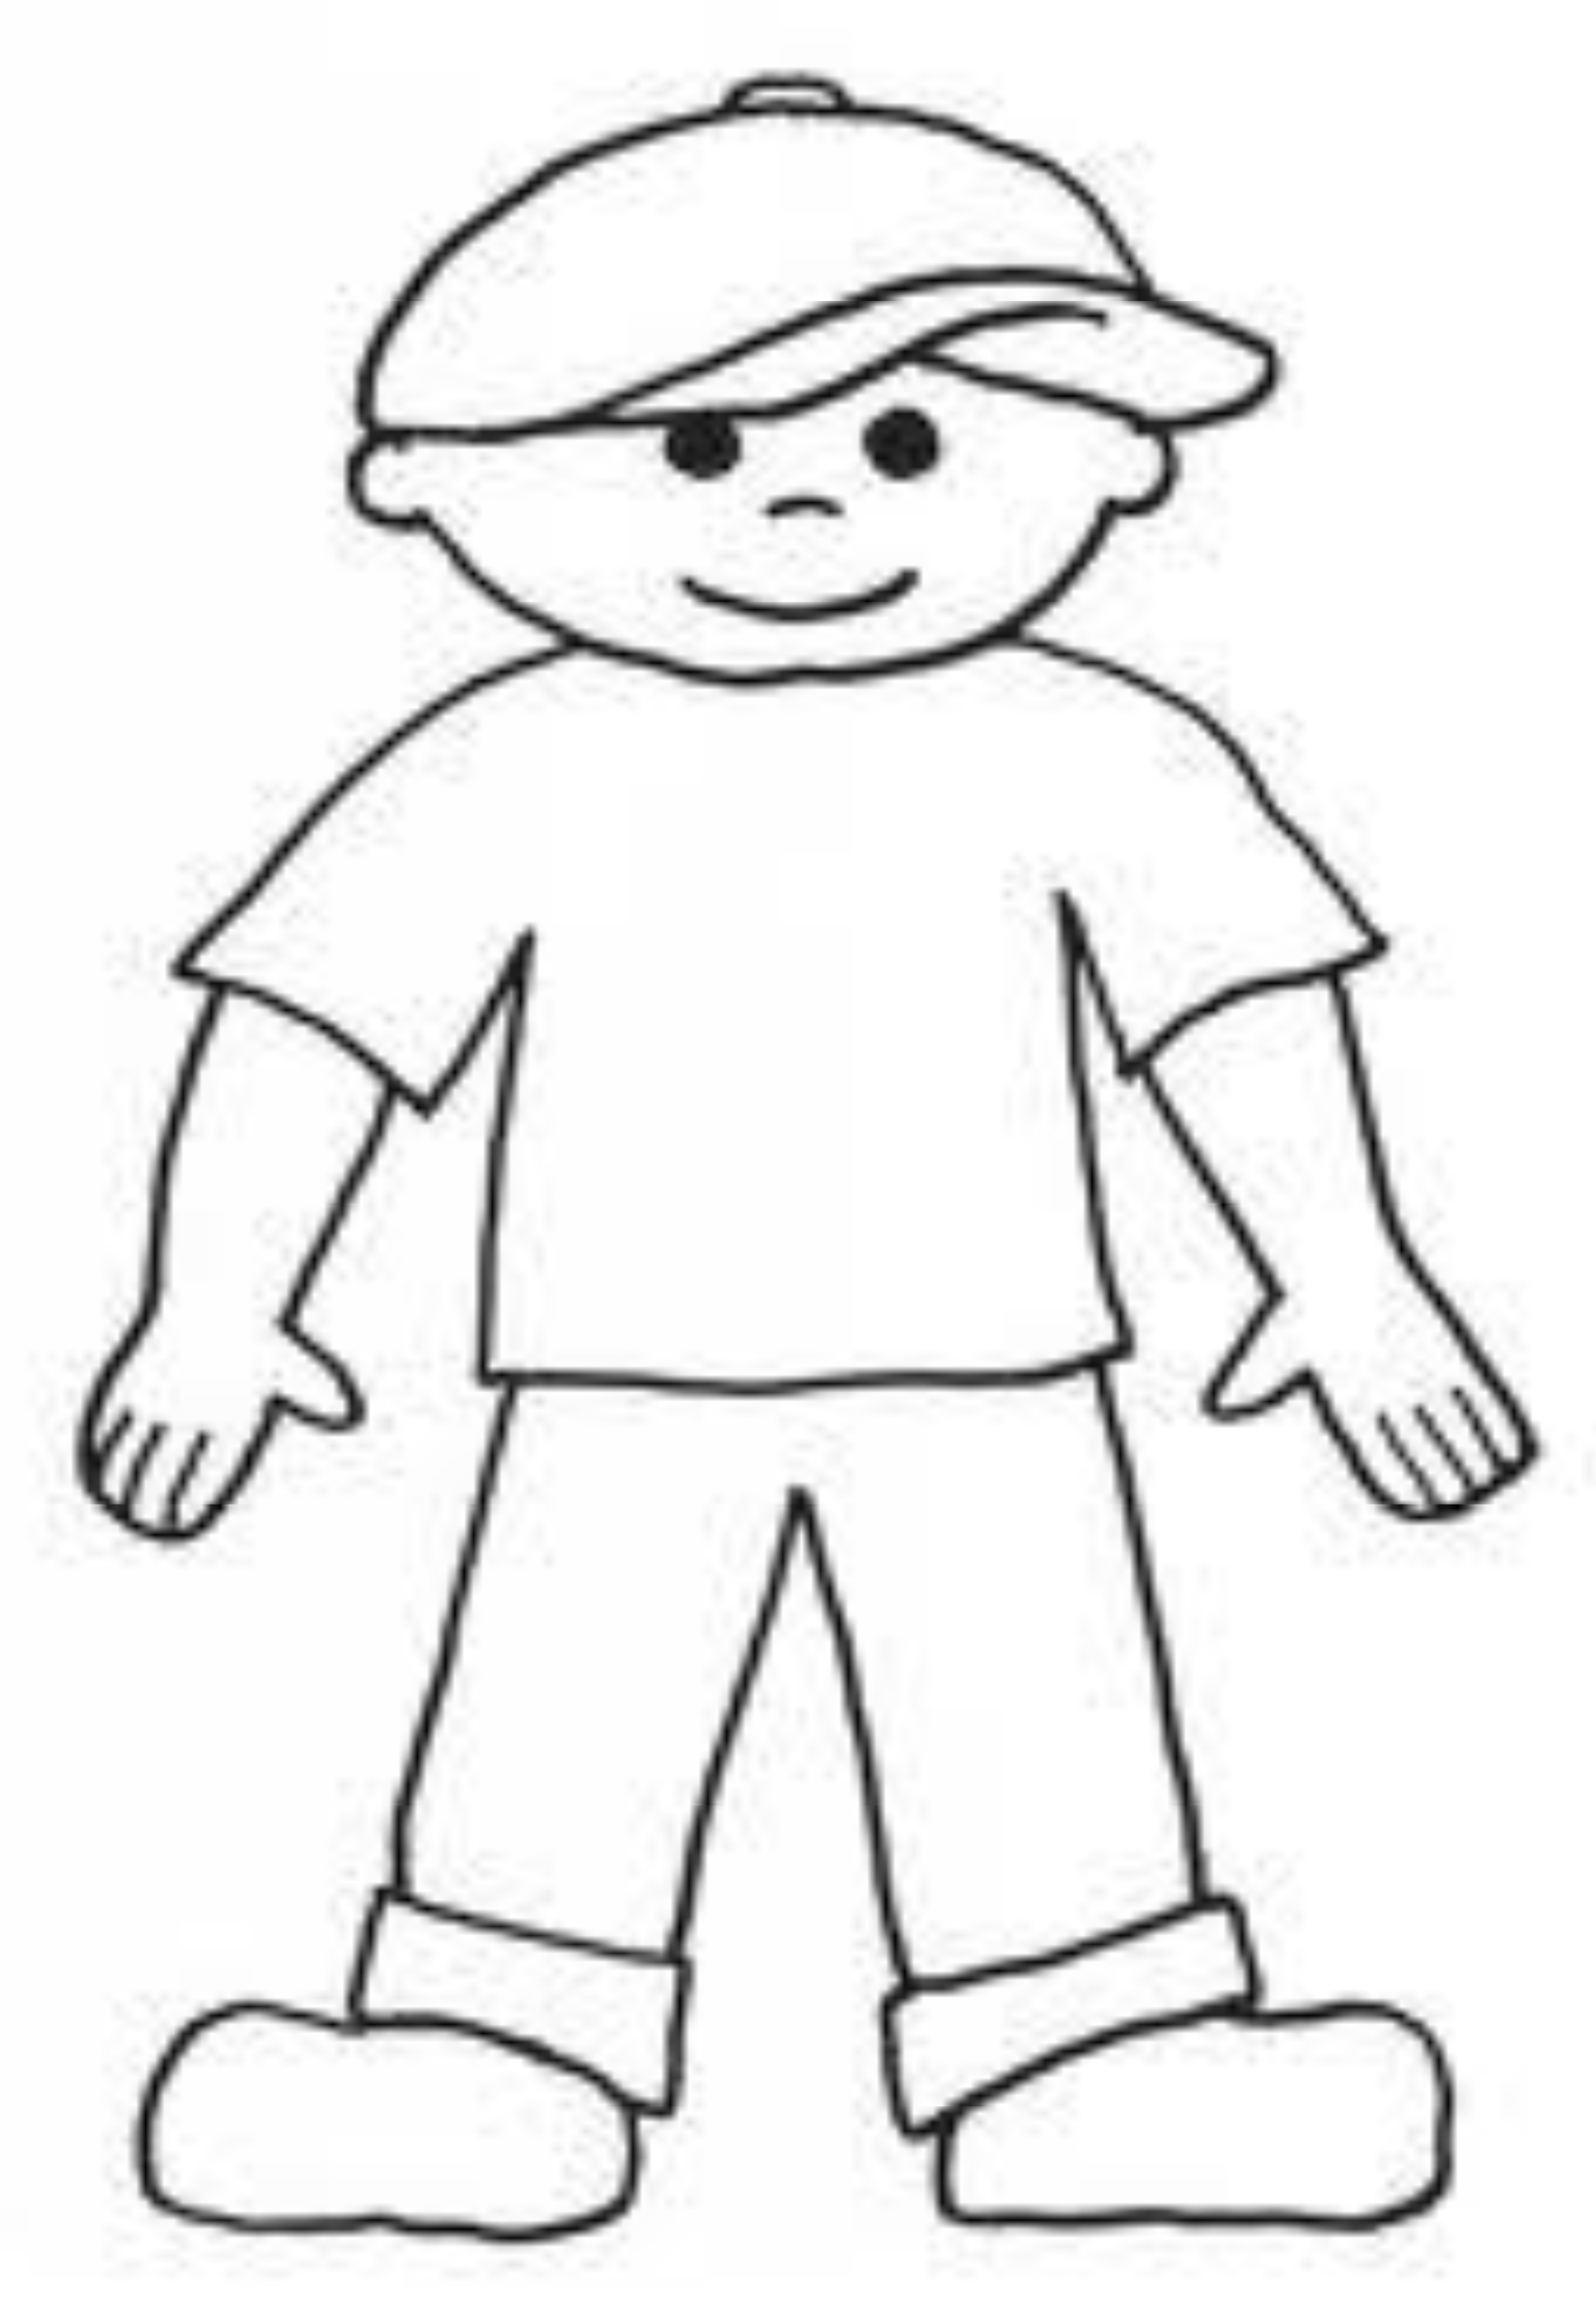 Flat Stanley Template Blank from clipart-library.com